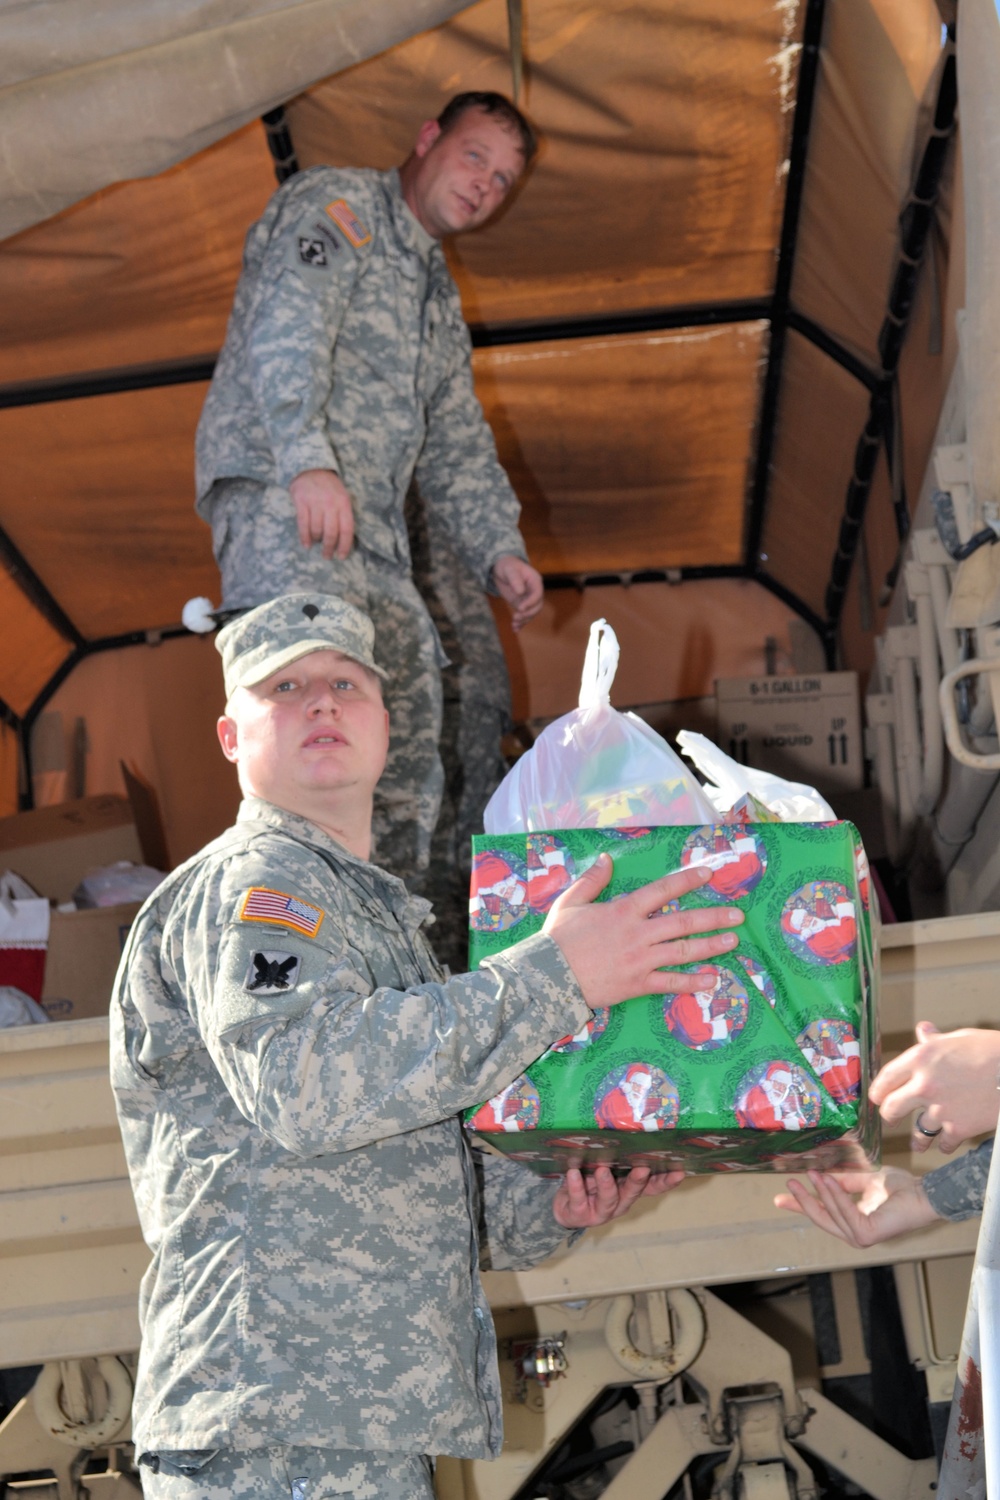 733rd Soldiers join community to fill Stockings for Soldiers